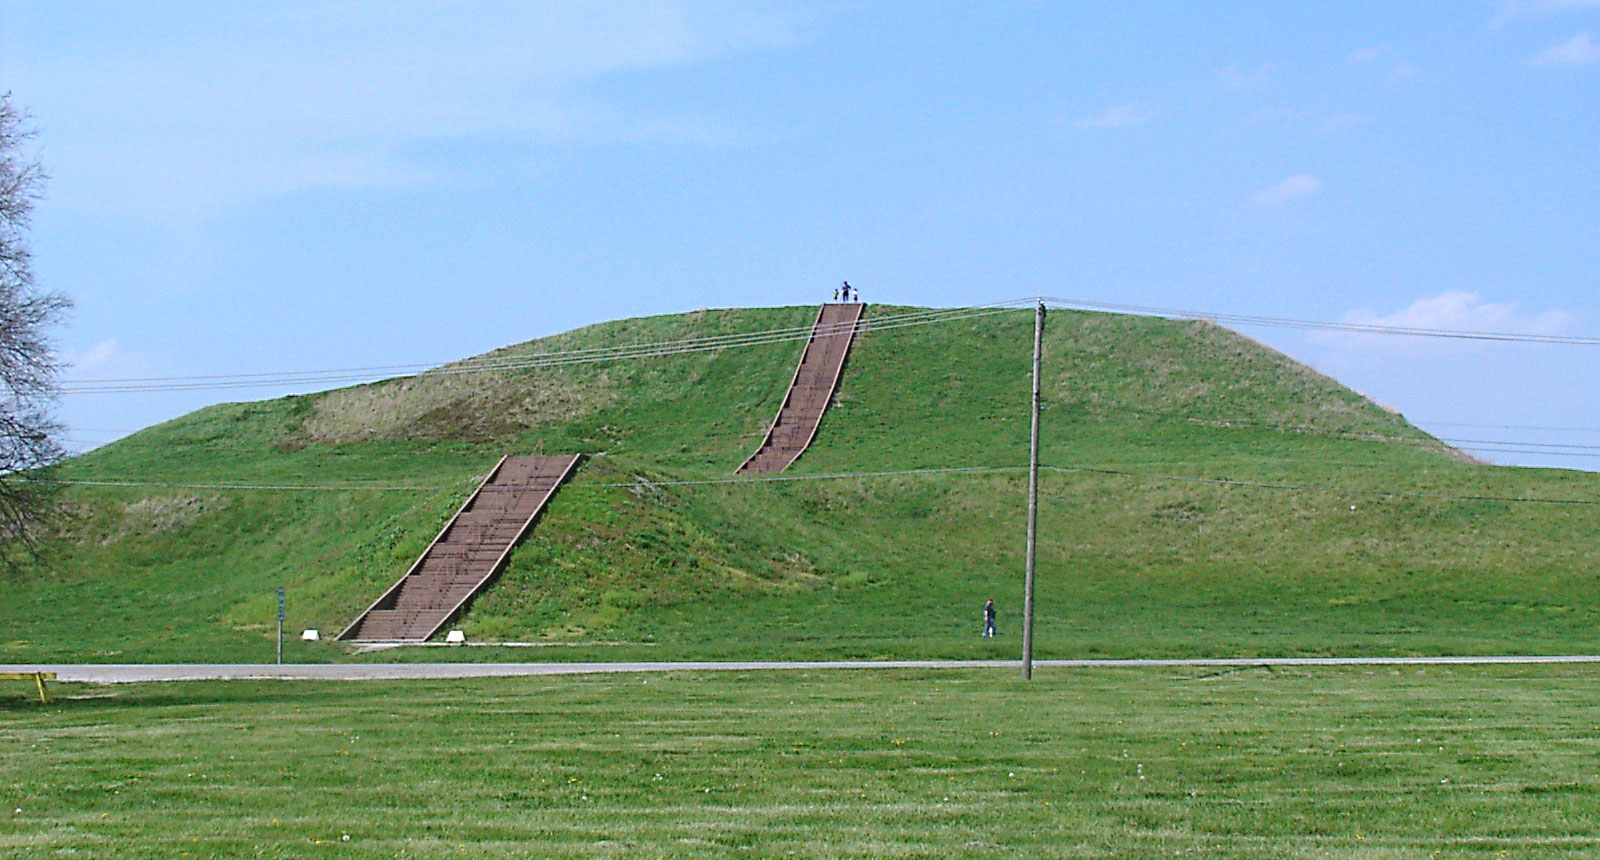 Photograph of Monks Mound at the Cahokia site in Illinois, U.S.A. The photo shows a large earthen mound with two tiers covered with grass. Steps run straight from the base to the top of the mound.